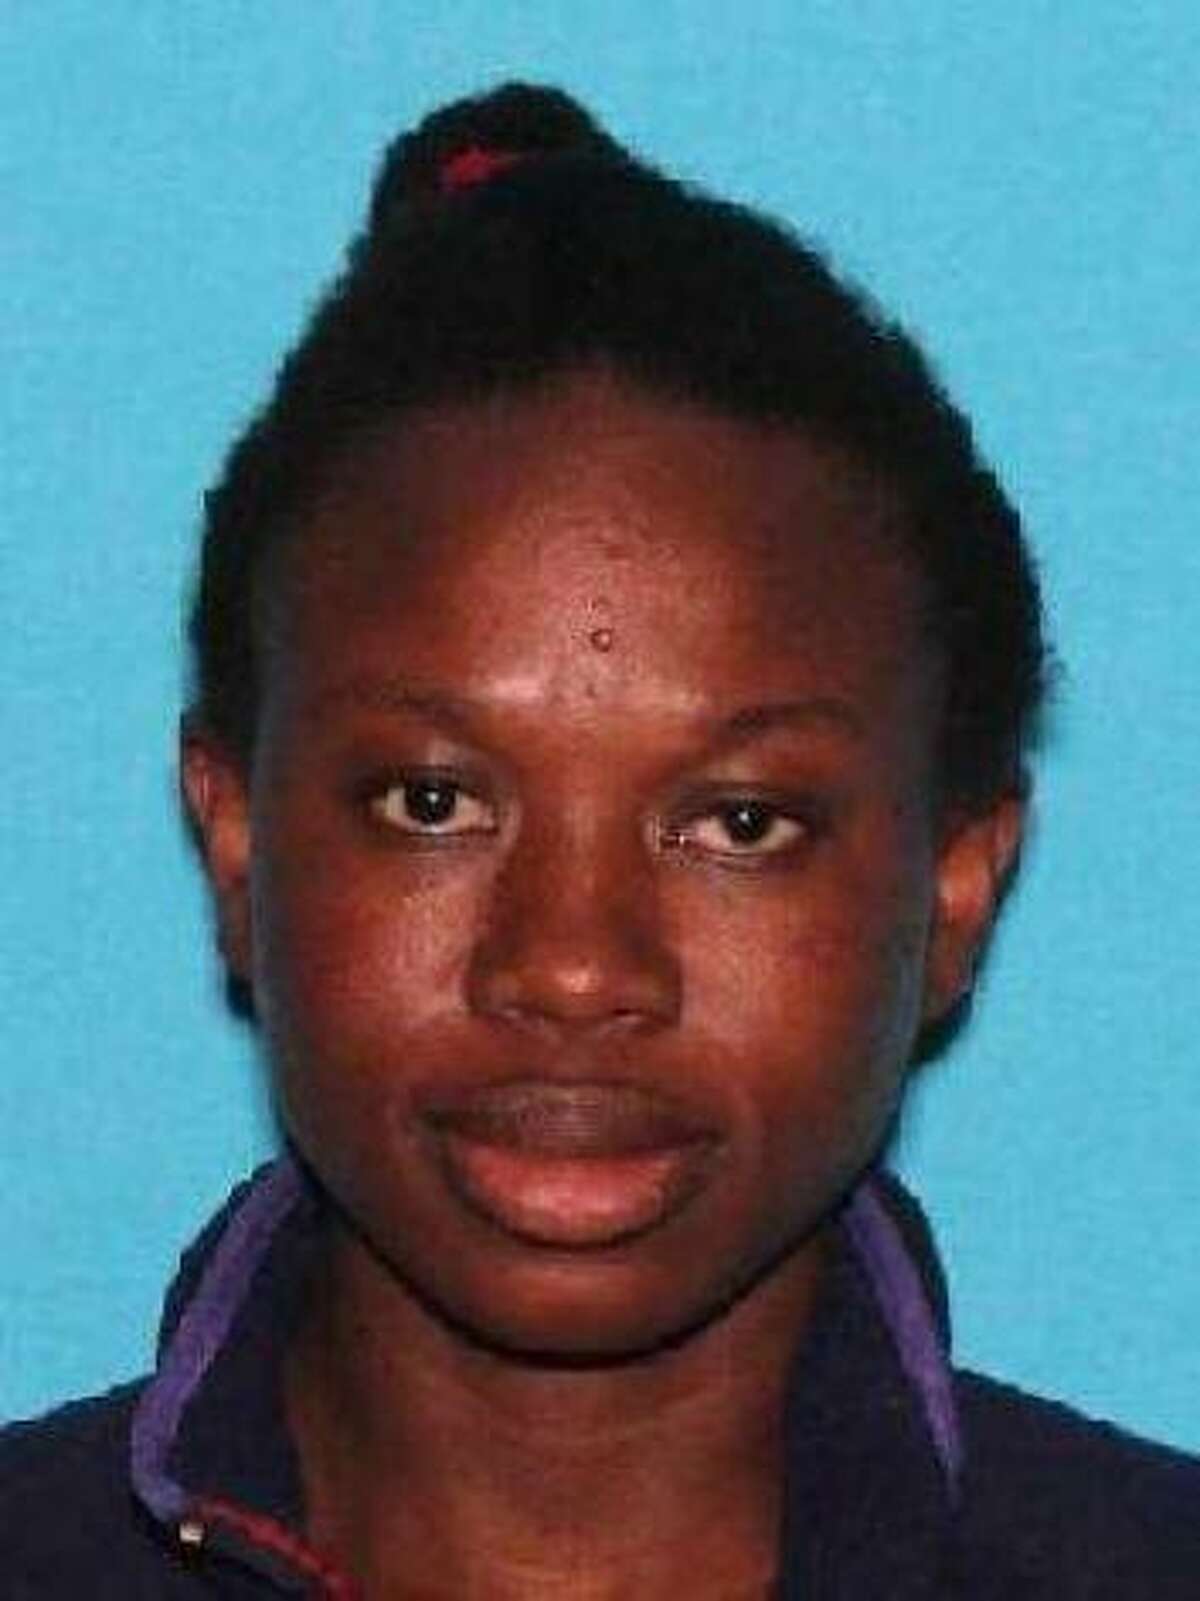 Houston police believe Anastacia Oaikhena Lambert, 27, was fatally stabbed by Patrick Lambert, the father of her child, and left in an apartment refrigerator. Photo: Houston Police Department